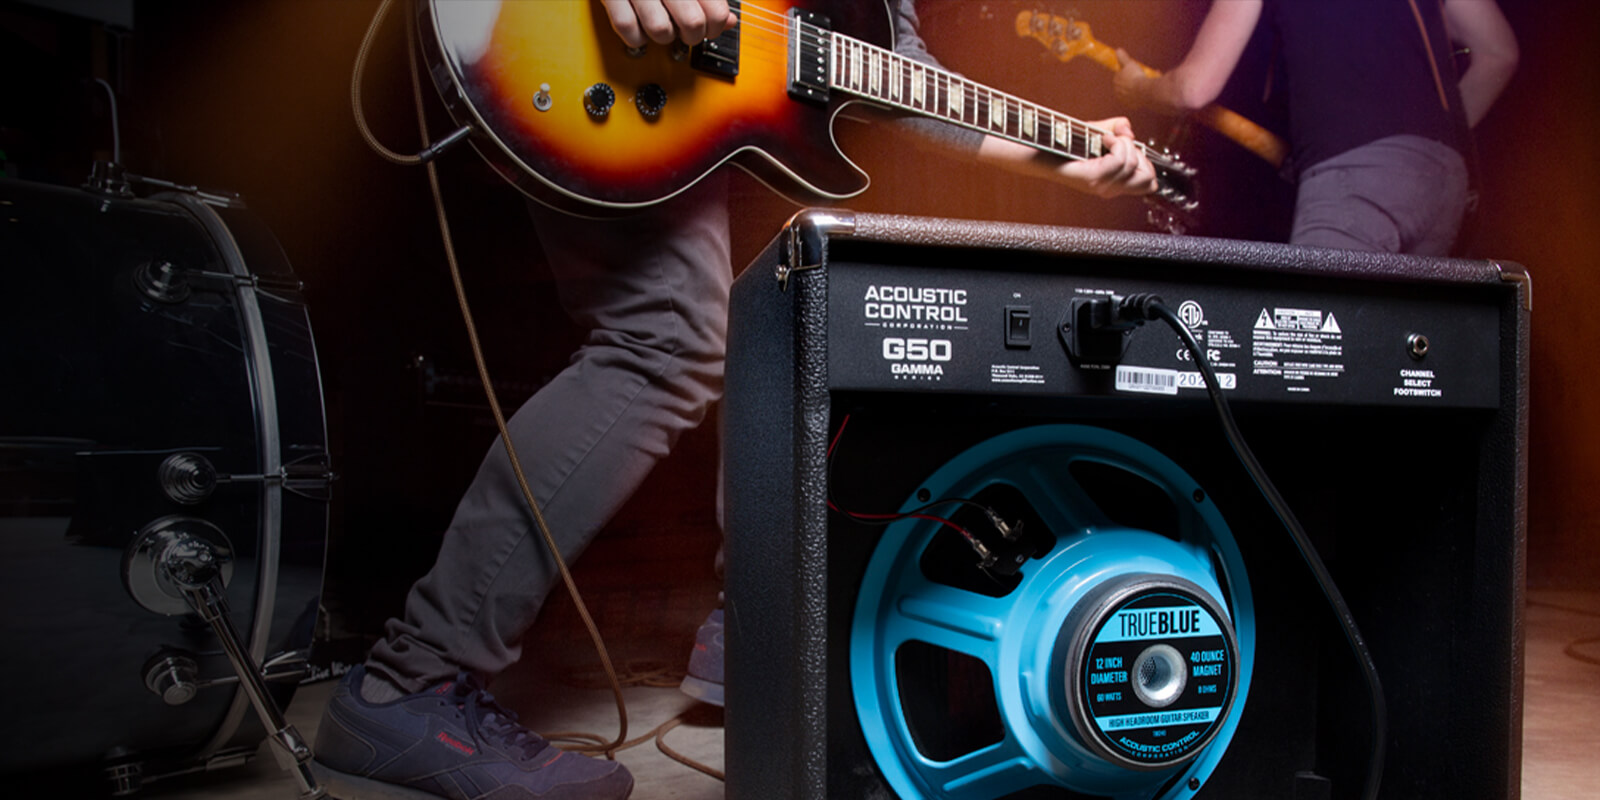 GAMMA G50 guitar amp on stage with performing band. The back of the amp is exposed, showing the bright blue 12